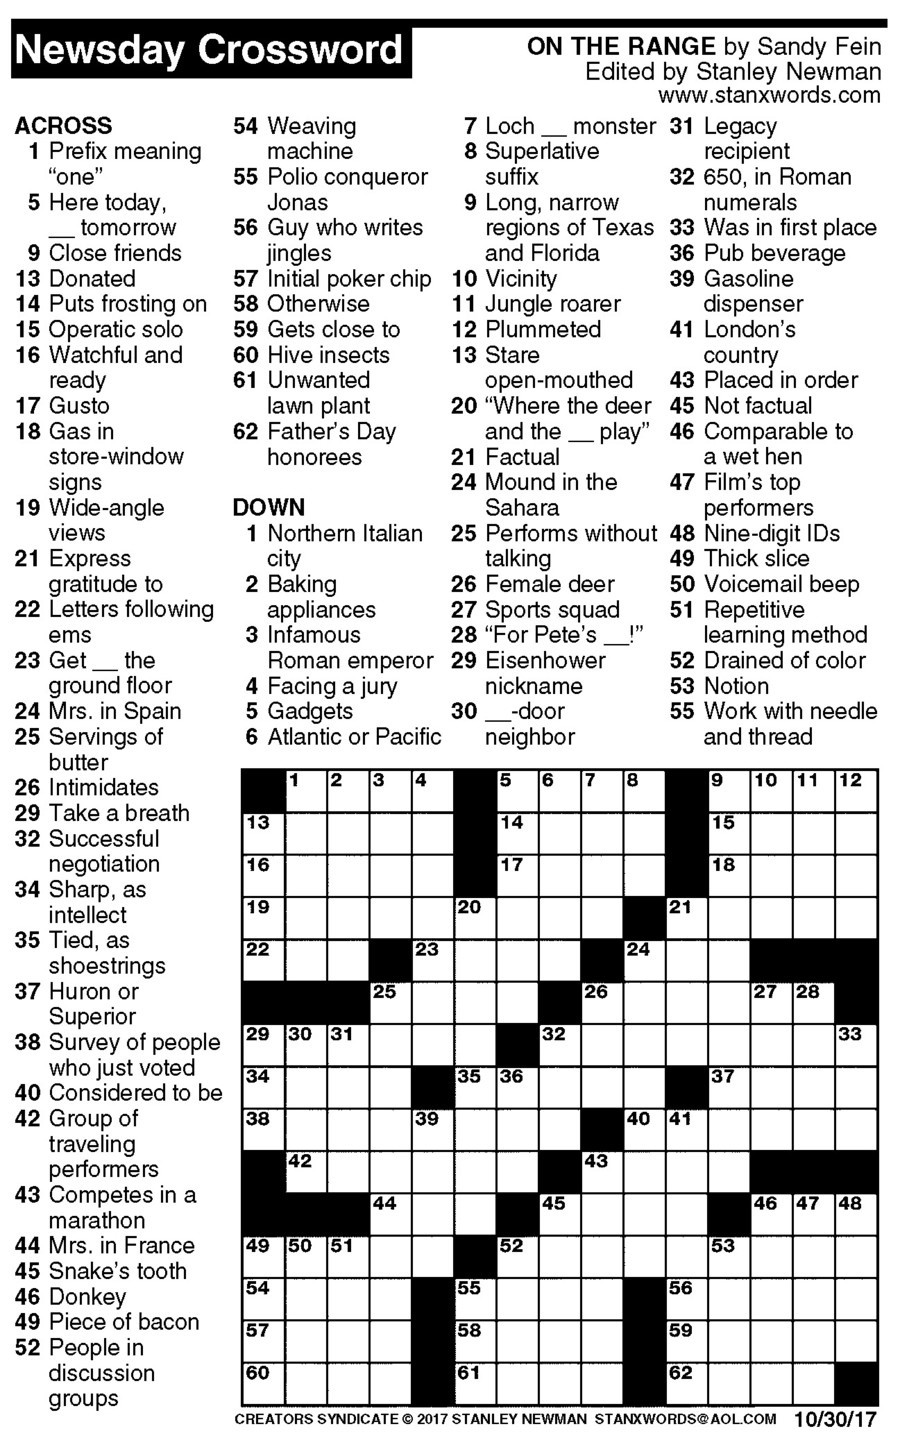 Newsday Crossword Puzzle For Oct 30 2017 By Stanley Newman Creators 